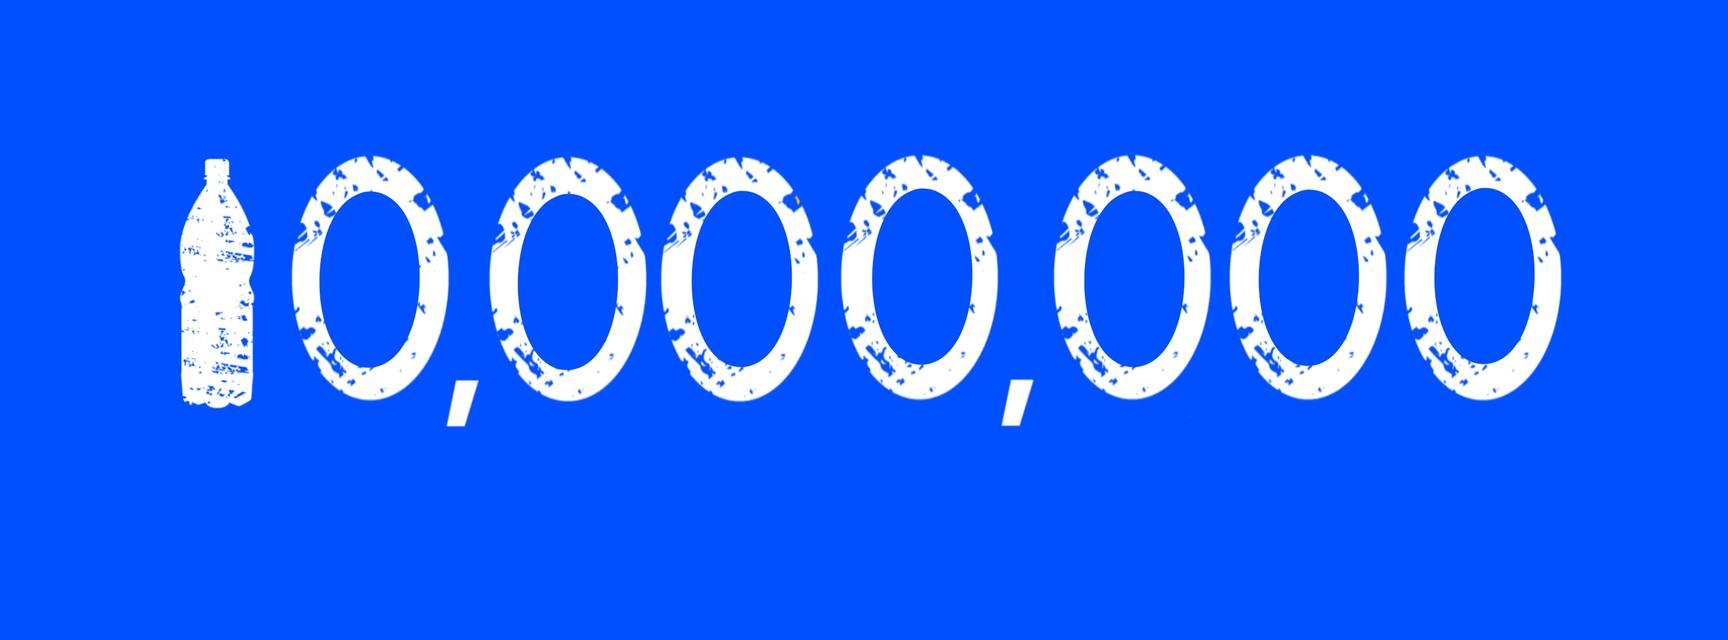 A graphic displaying the number 10 million